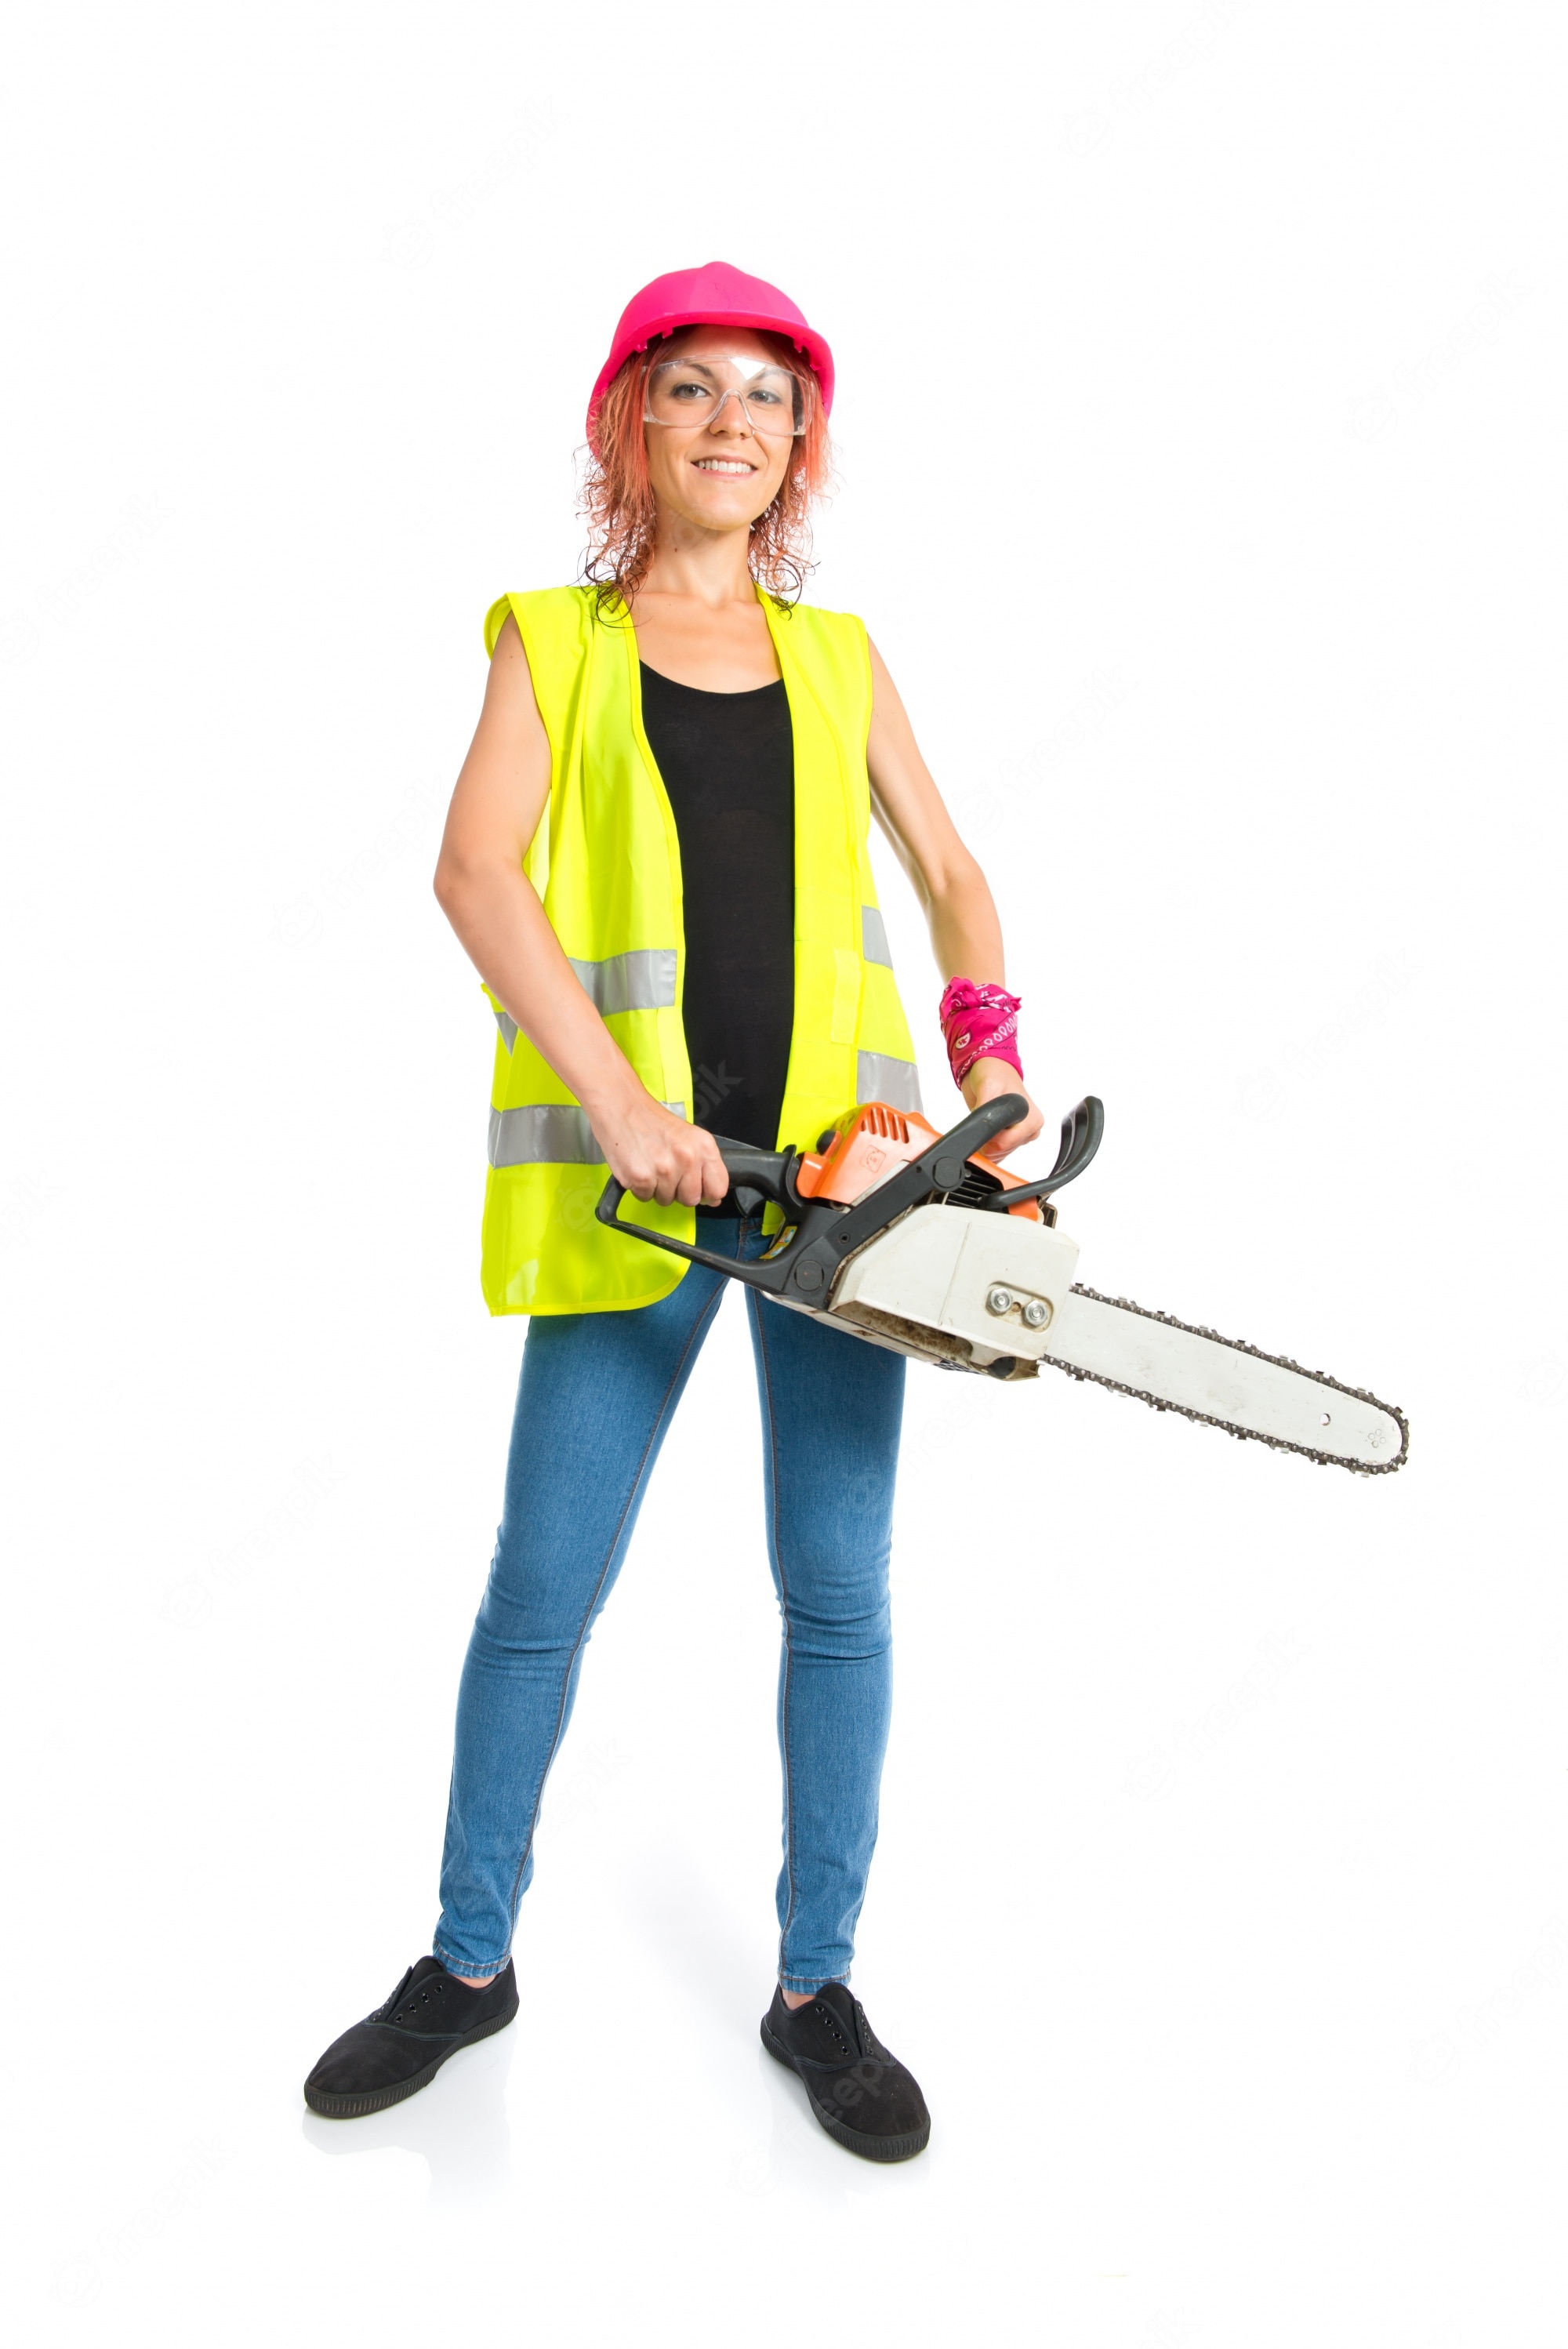 worker-woman-with-chainsaw-white-background_1368-15870.jpg